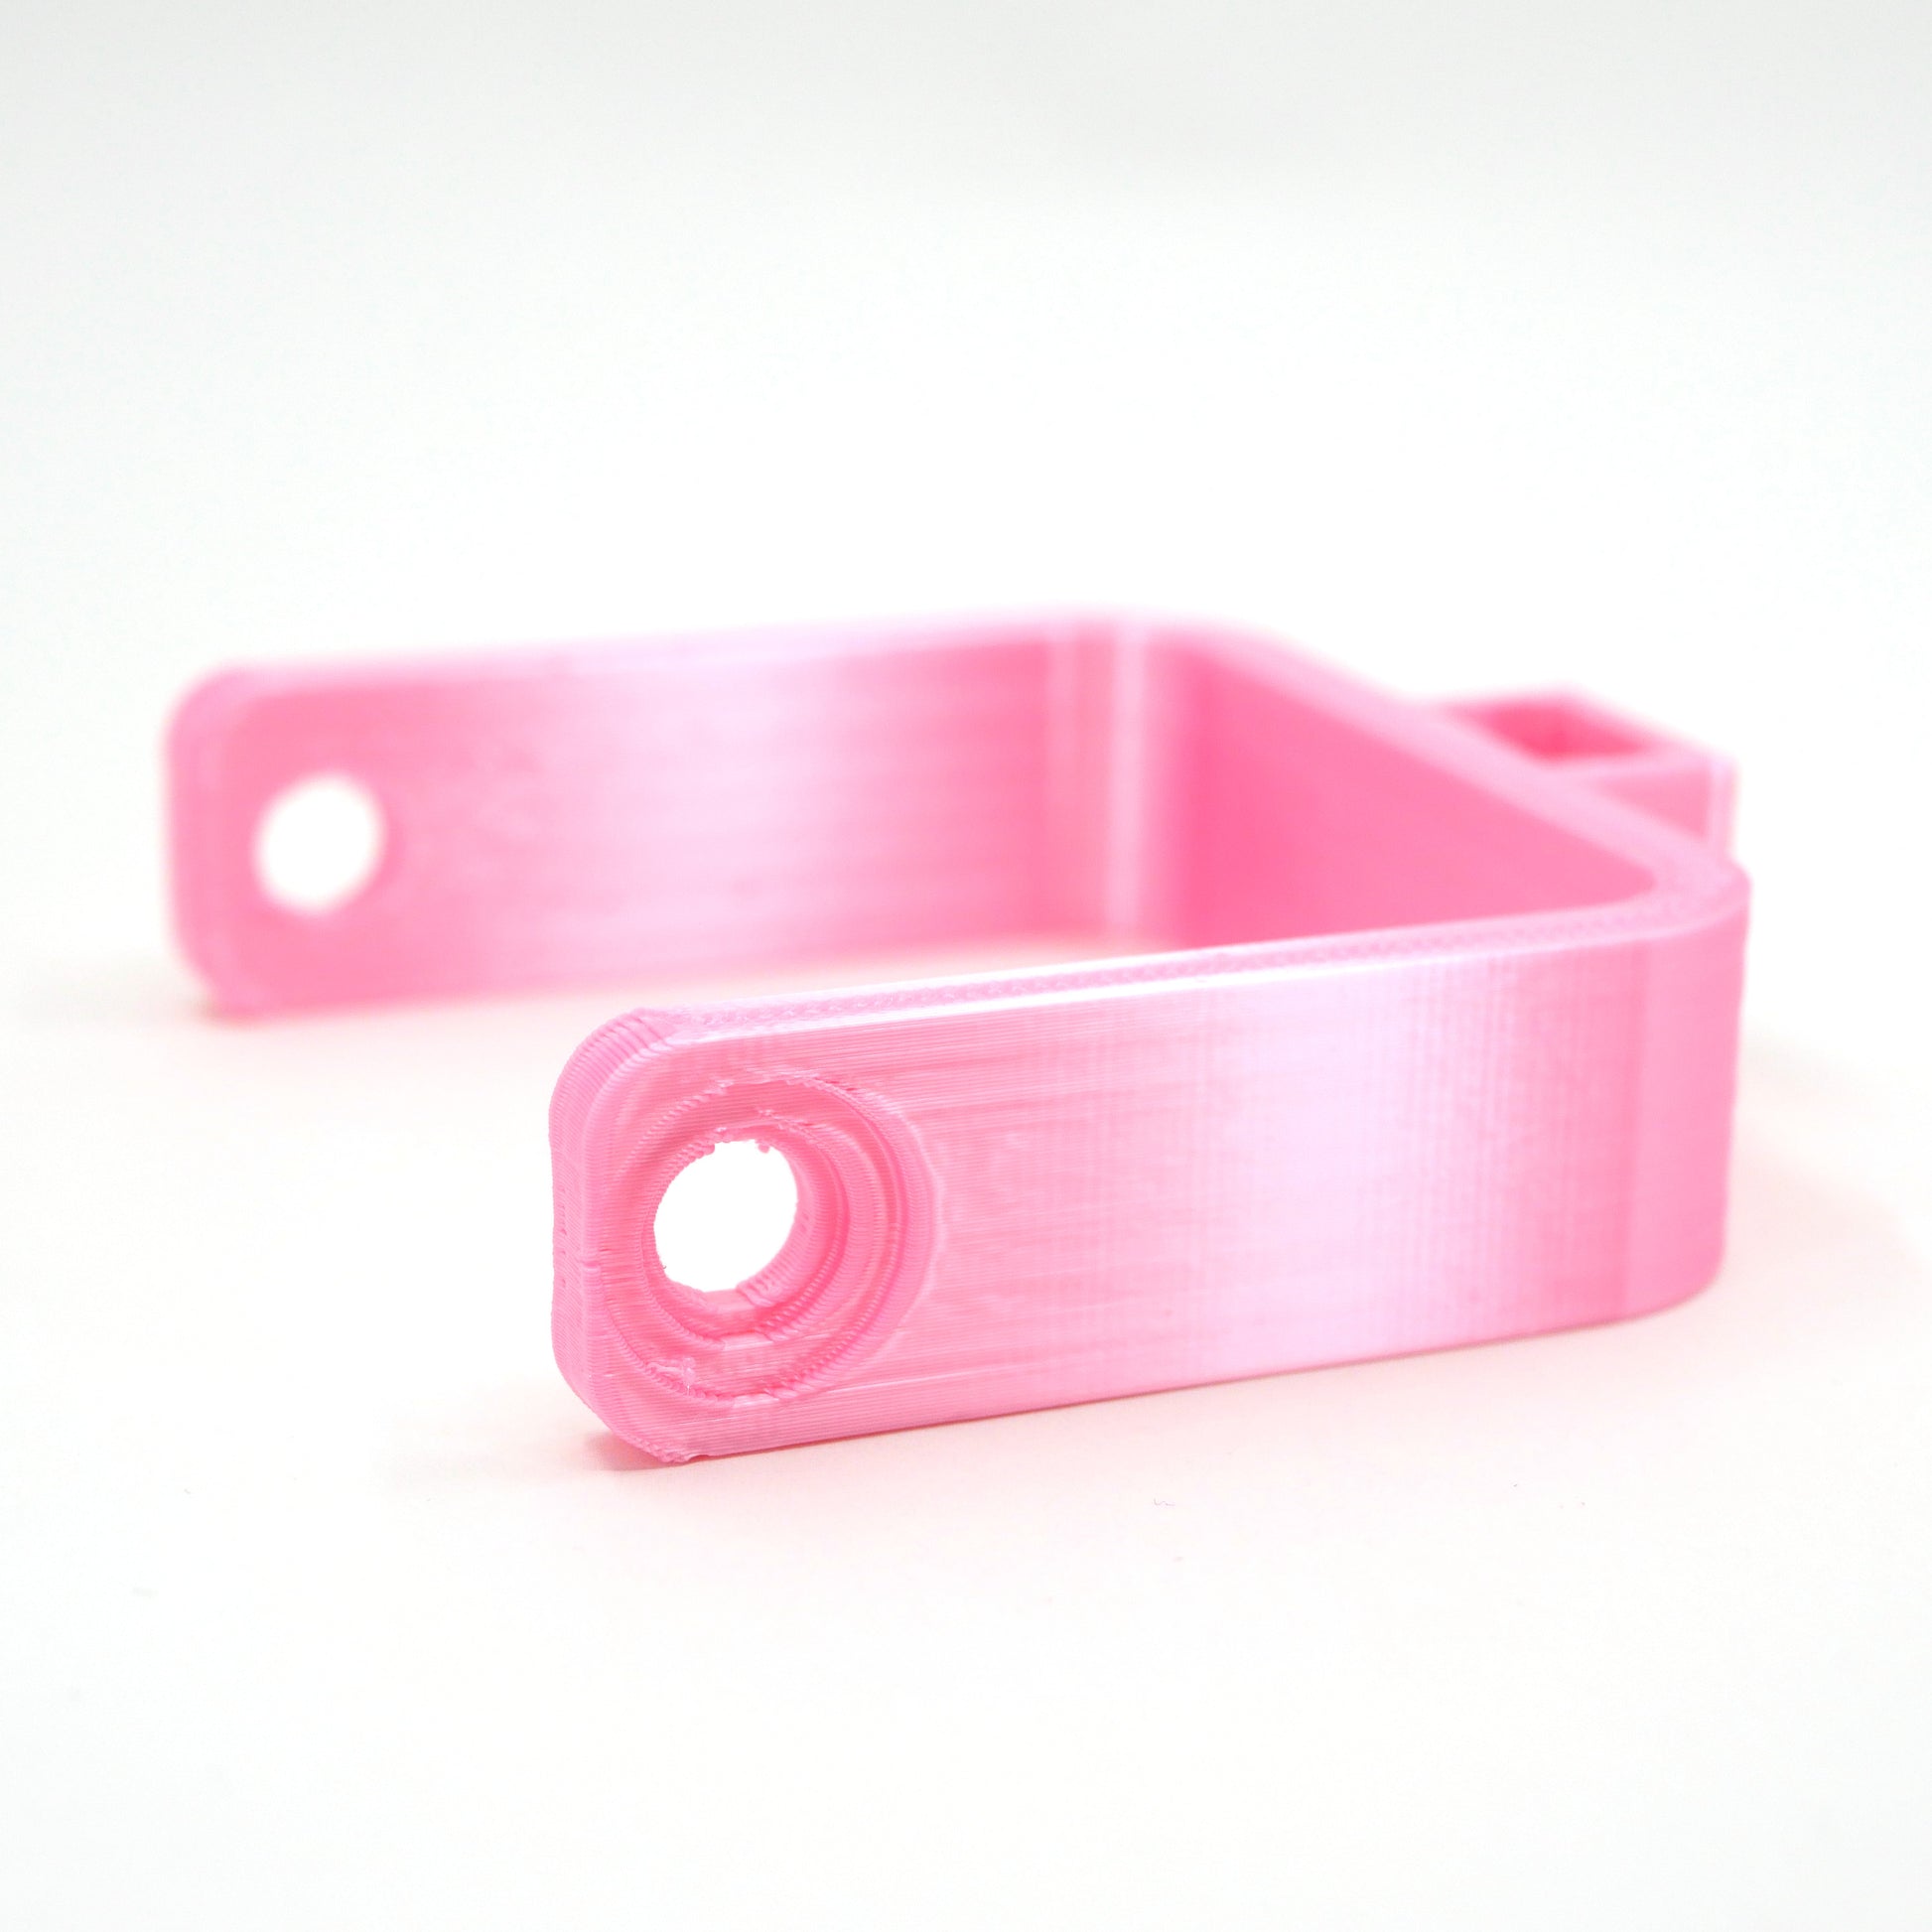 A pink microphone mount for the Elgato Wave microphone.